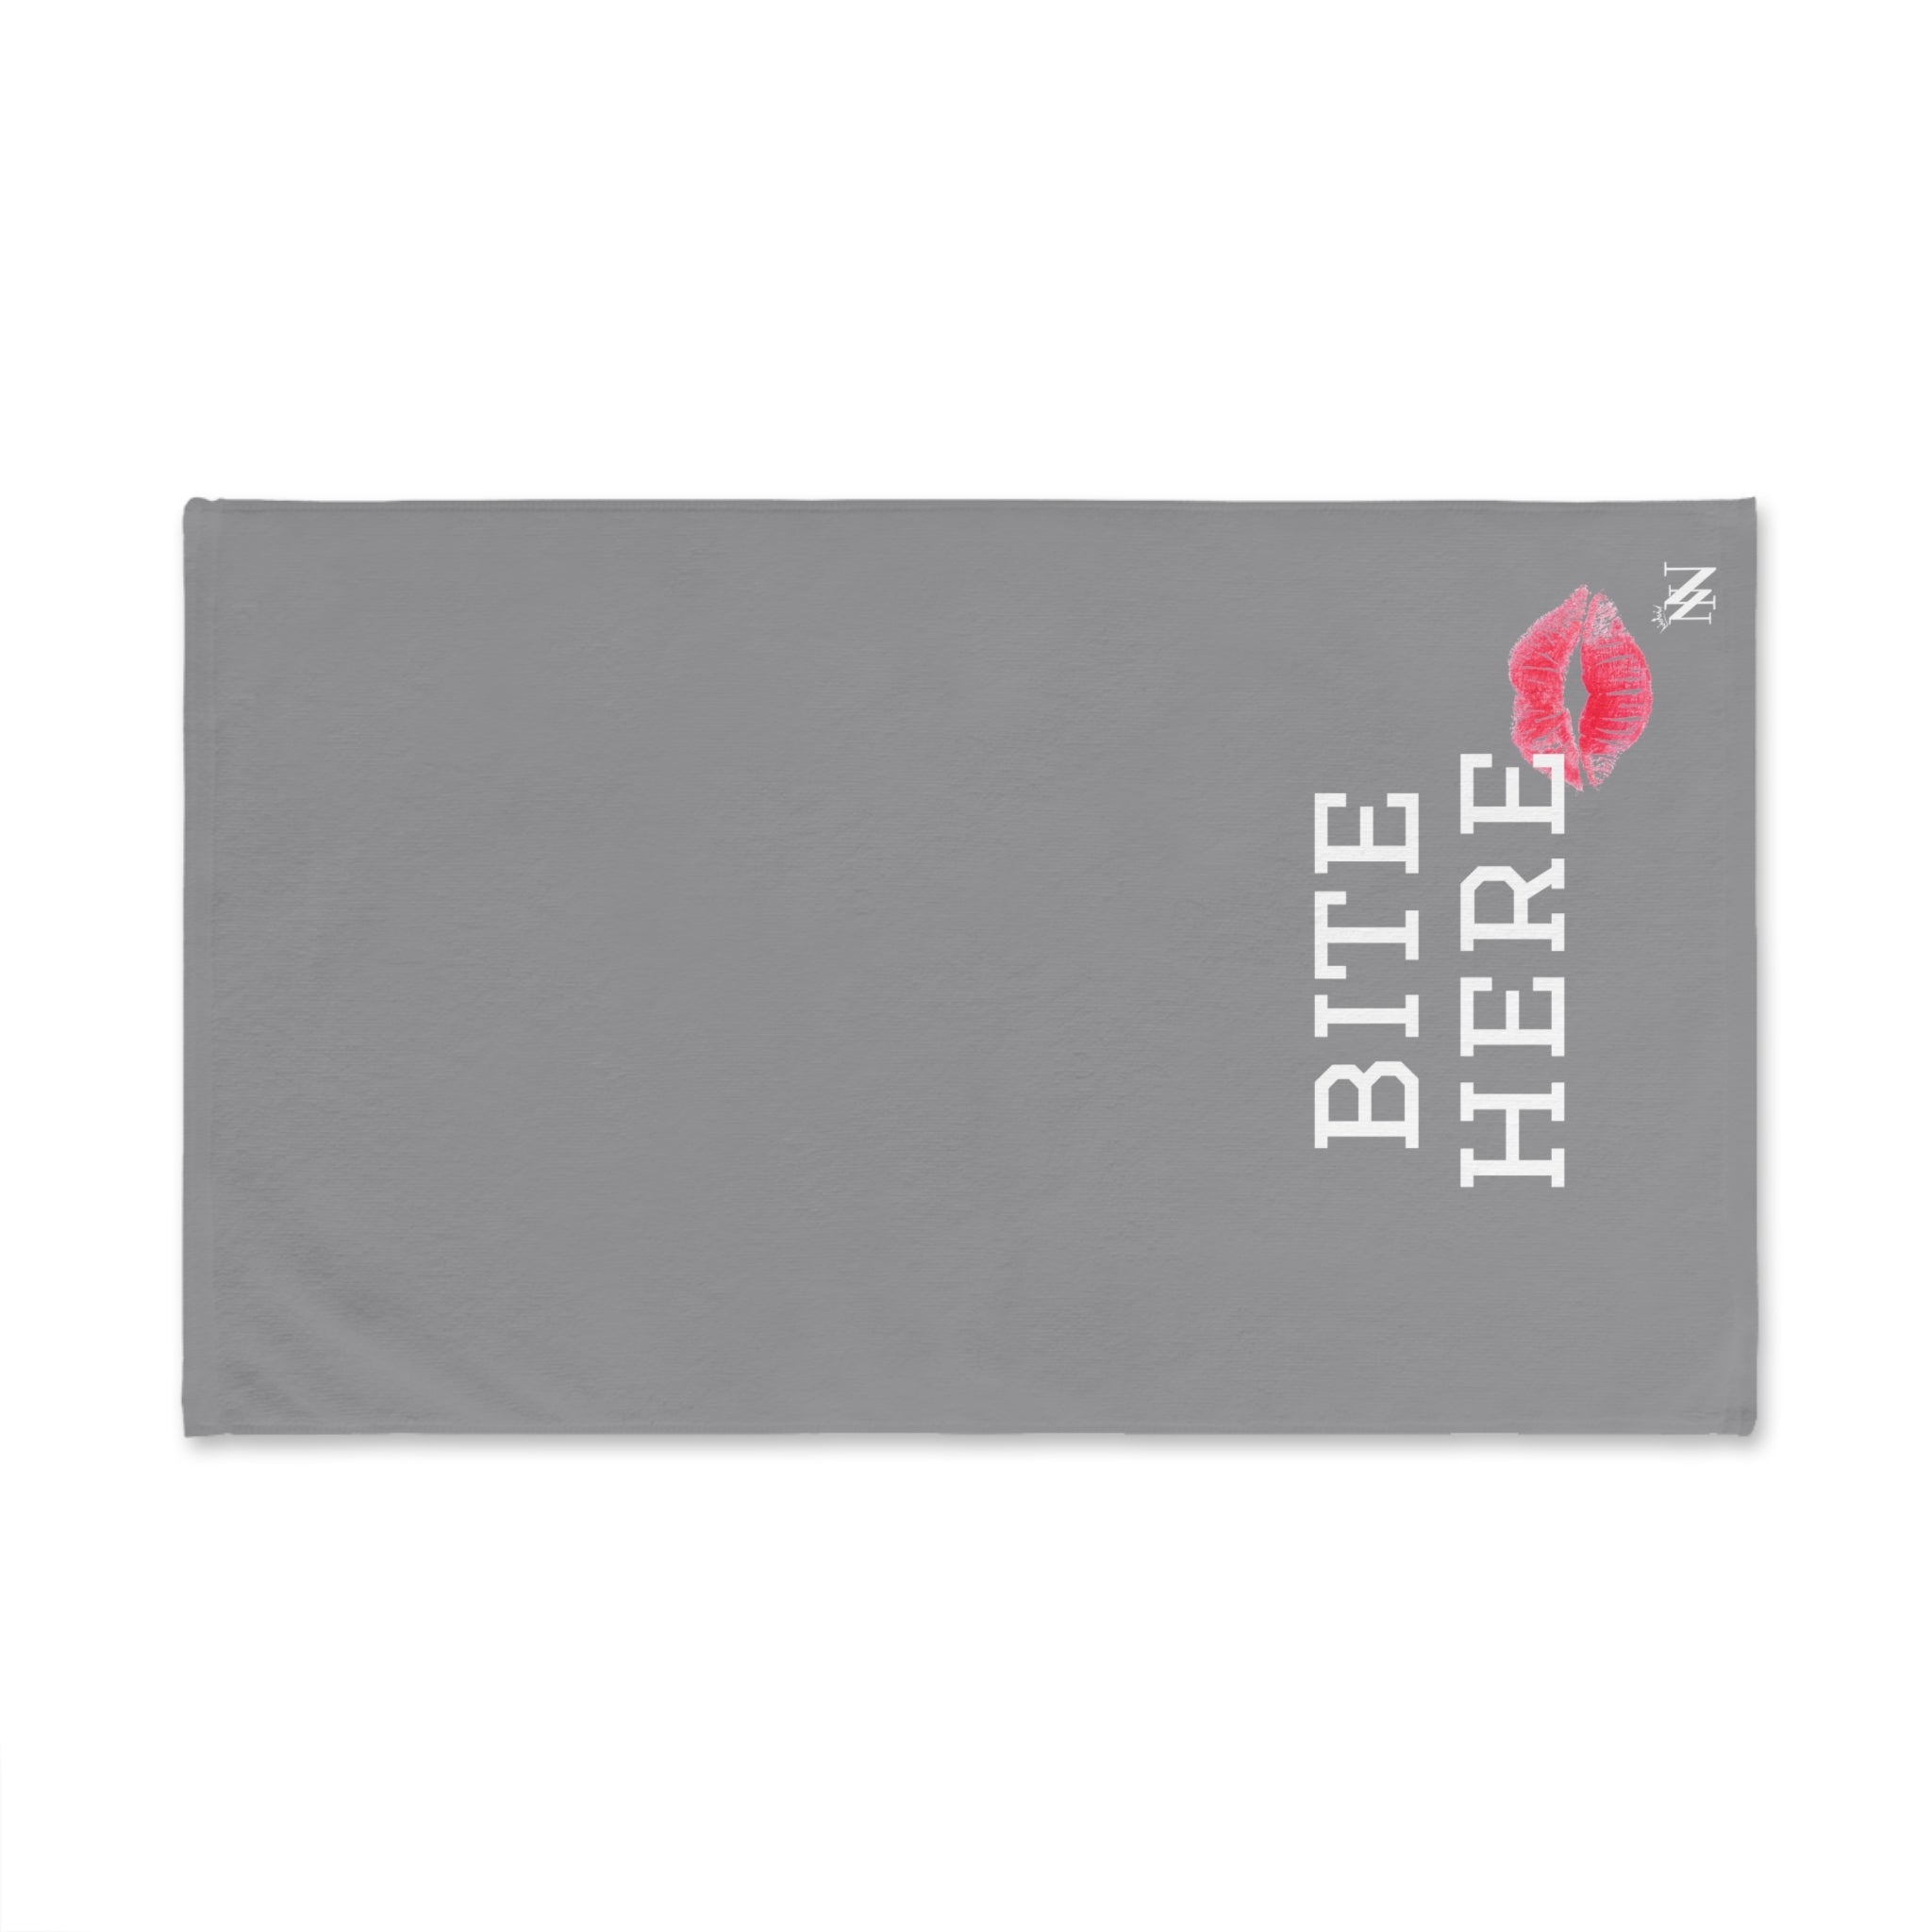 Cheer Bite Here Grey | Anniversary Wedding, Christmas, Valentines Day, Birthday Gifts for Him, Her, Romantic Gifts for Wife, Girlfriend, Couples Gifts for Boyfriend, Husband NECTAR NAPKINS